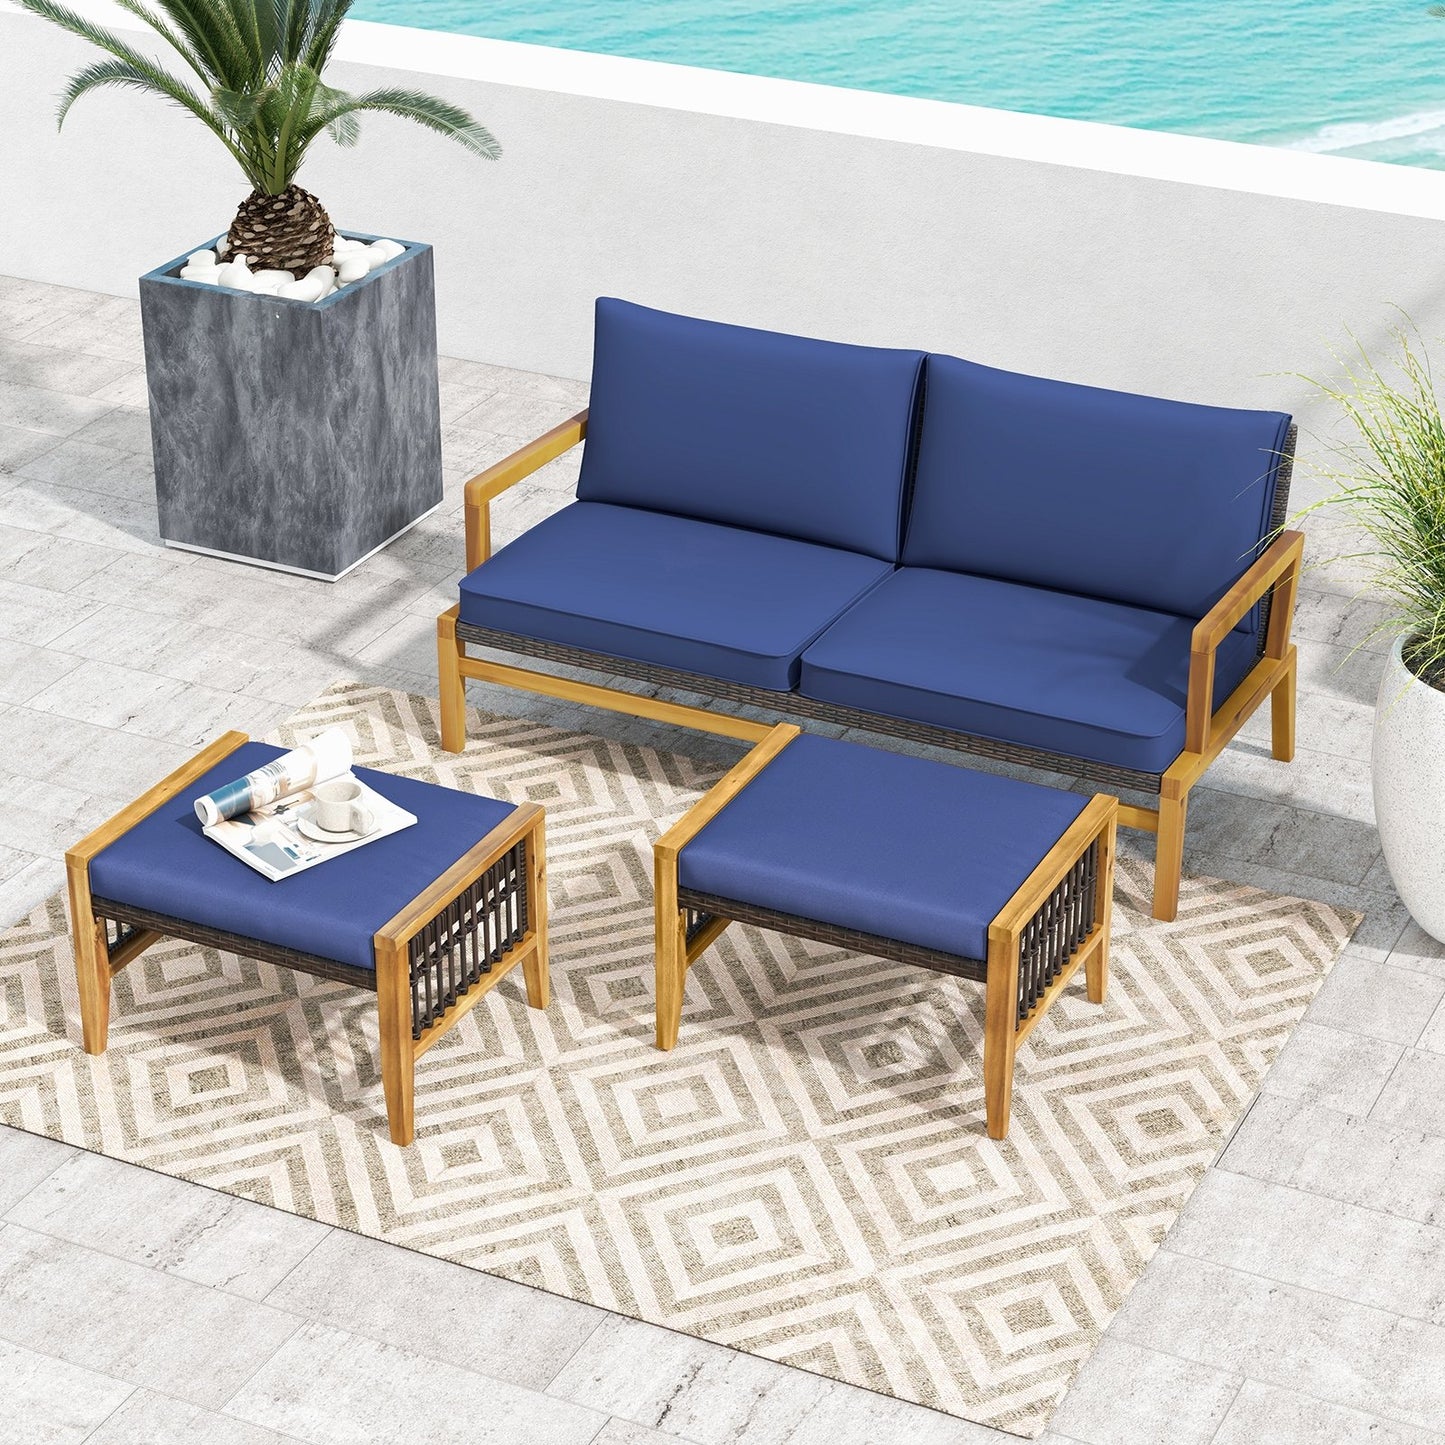 Patio Acacia Wood Ottomans with Cushions and Versatile Rattan Woven Footstools, Navy